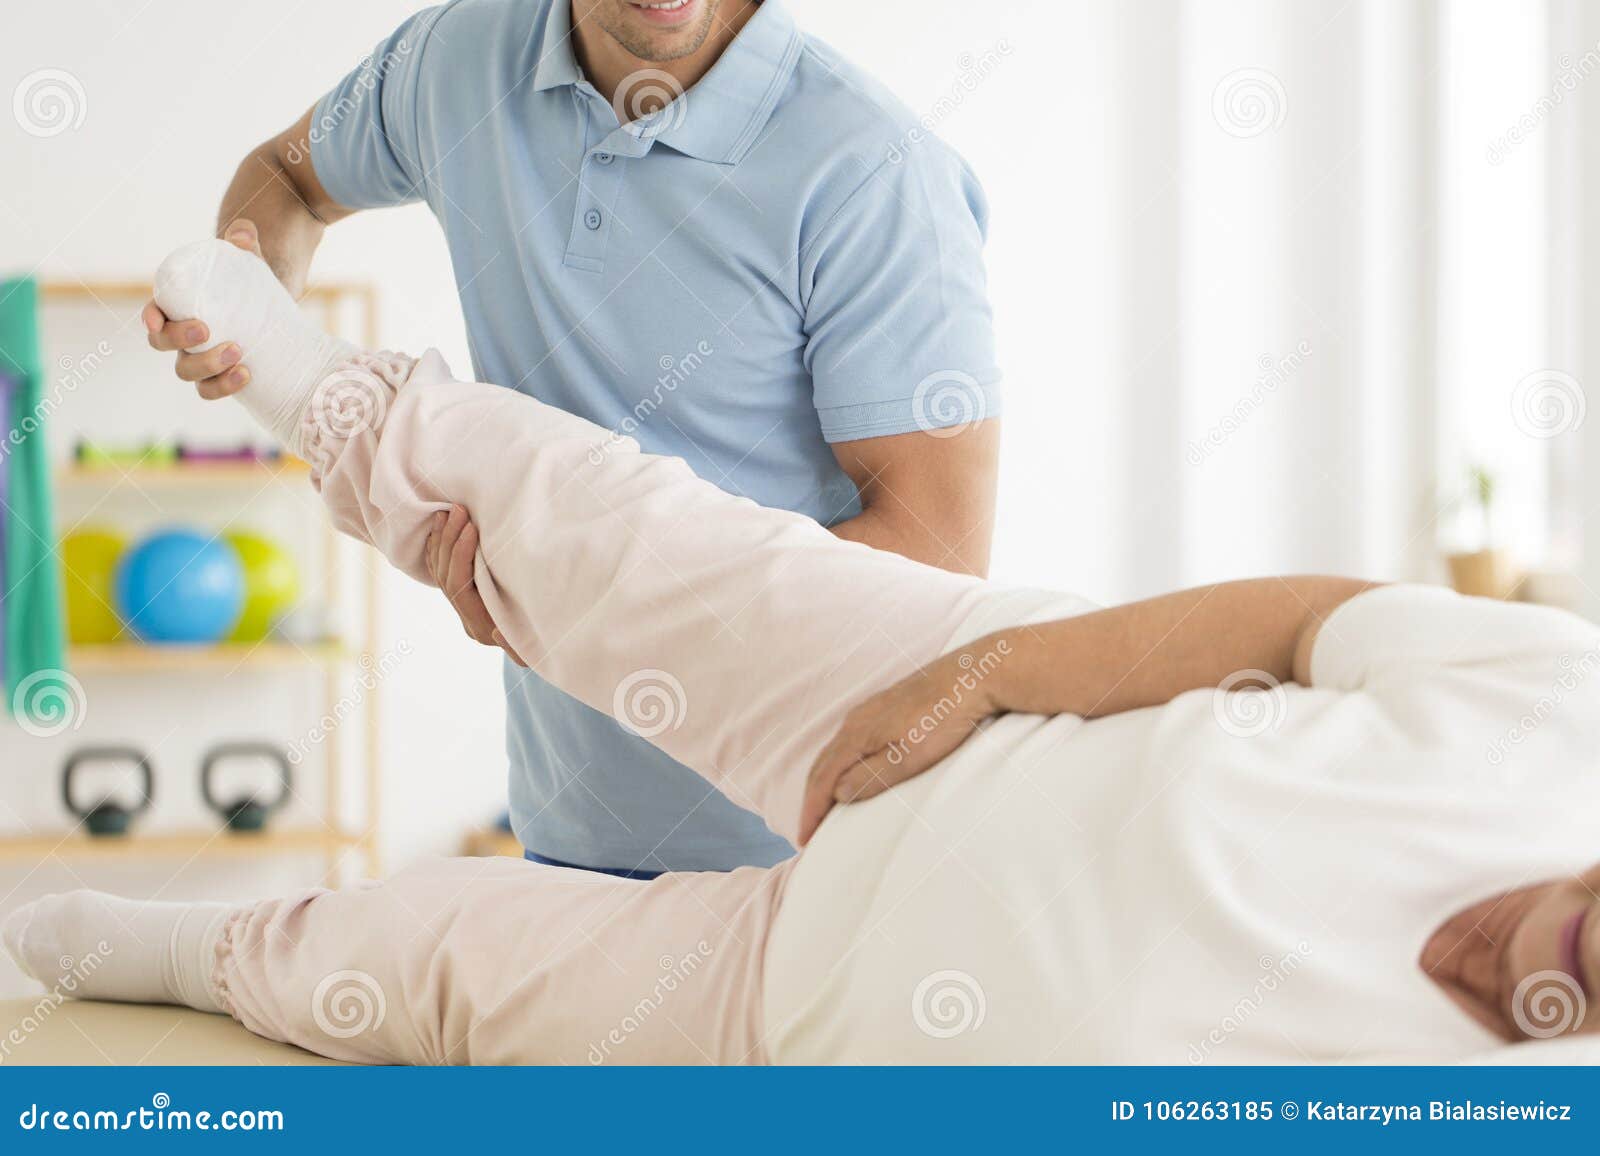 personal physiotherapist rehabilitating joints